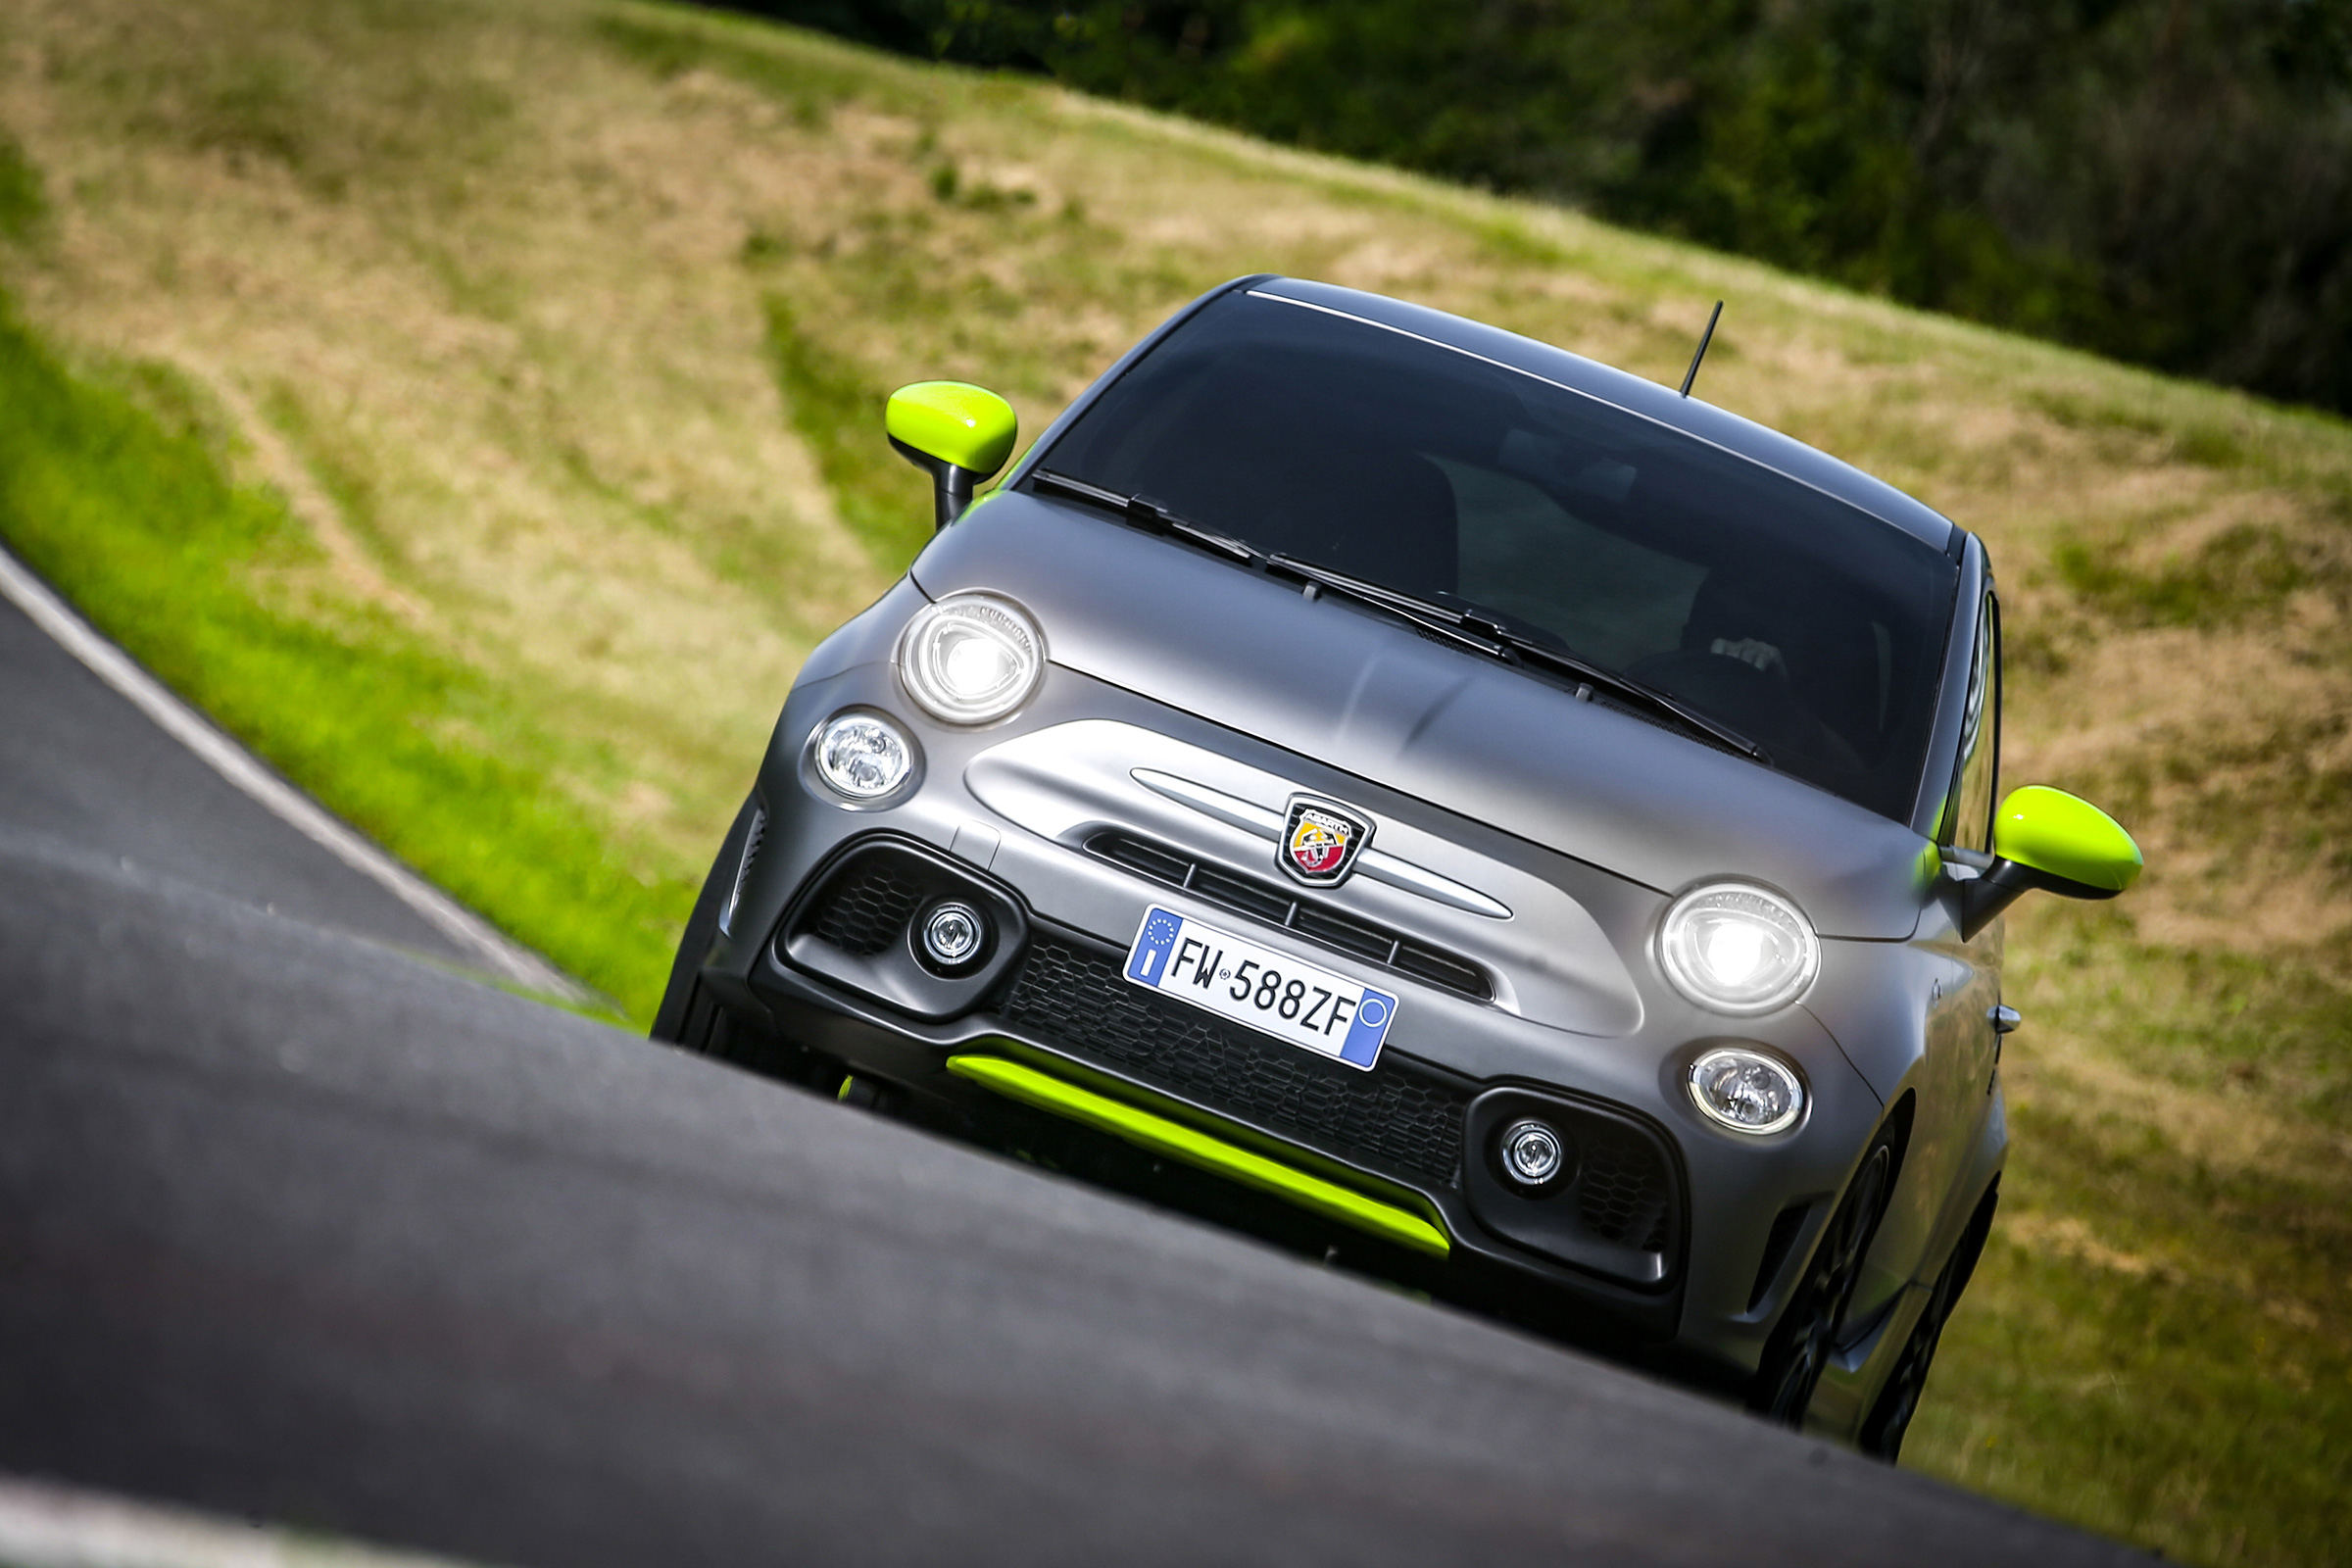 2020 Abarth 595 Pista arrives with 162bhp - pictures